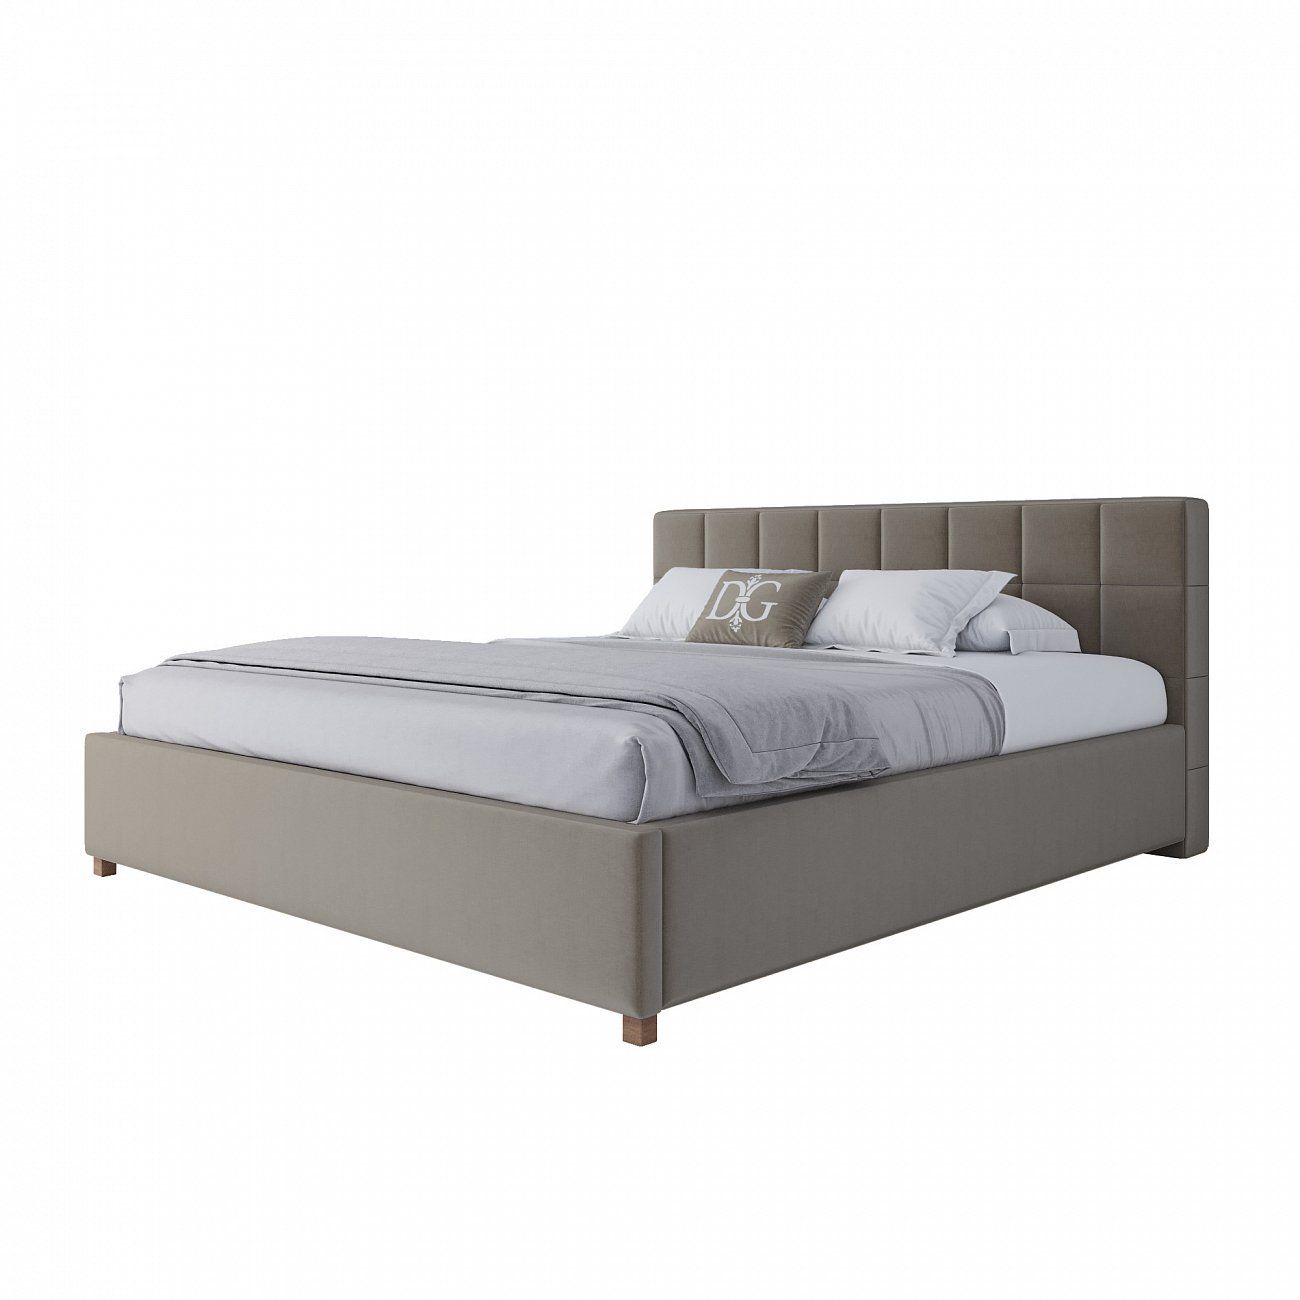 Double bed with upholstered headboard 180x200 cm grey Wales